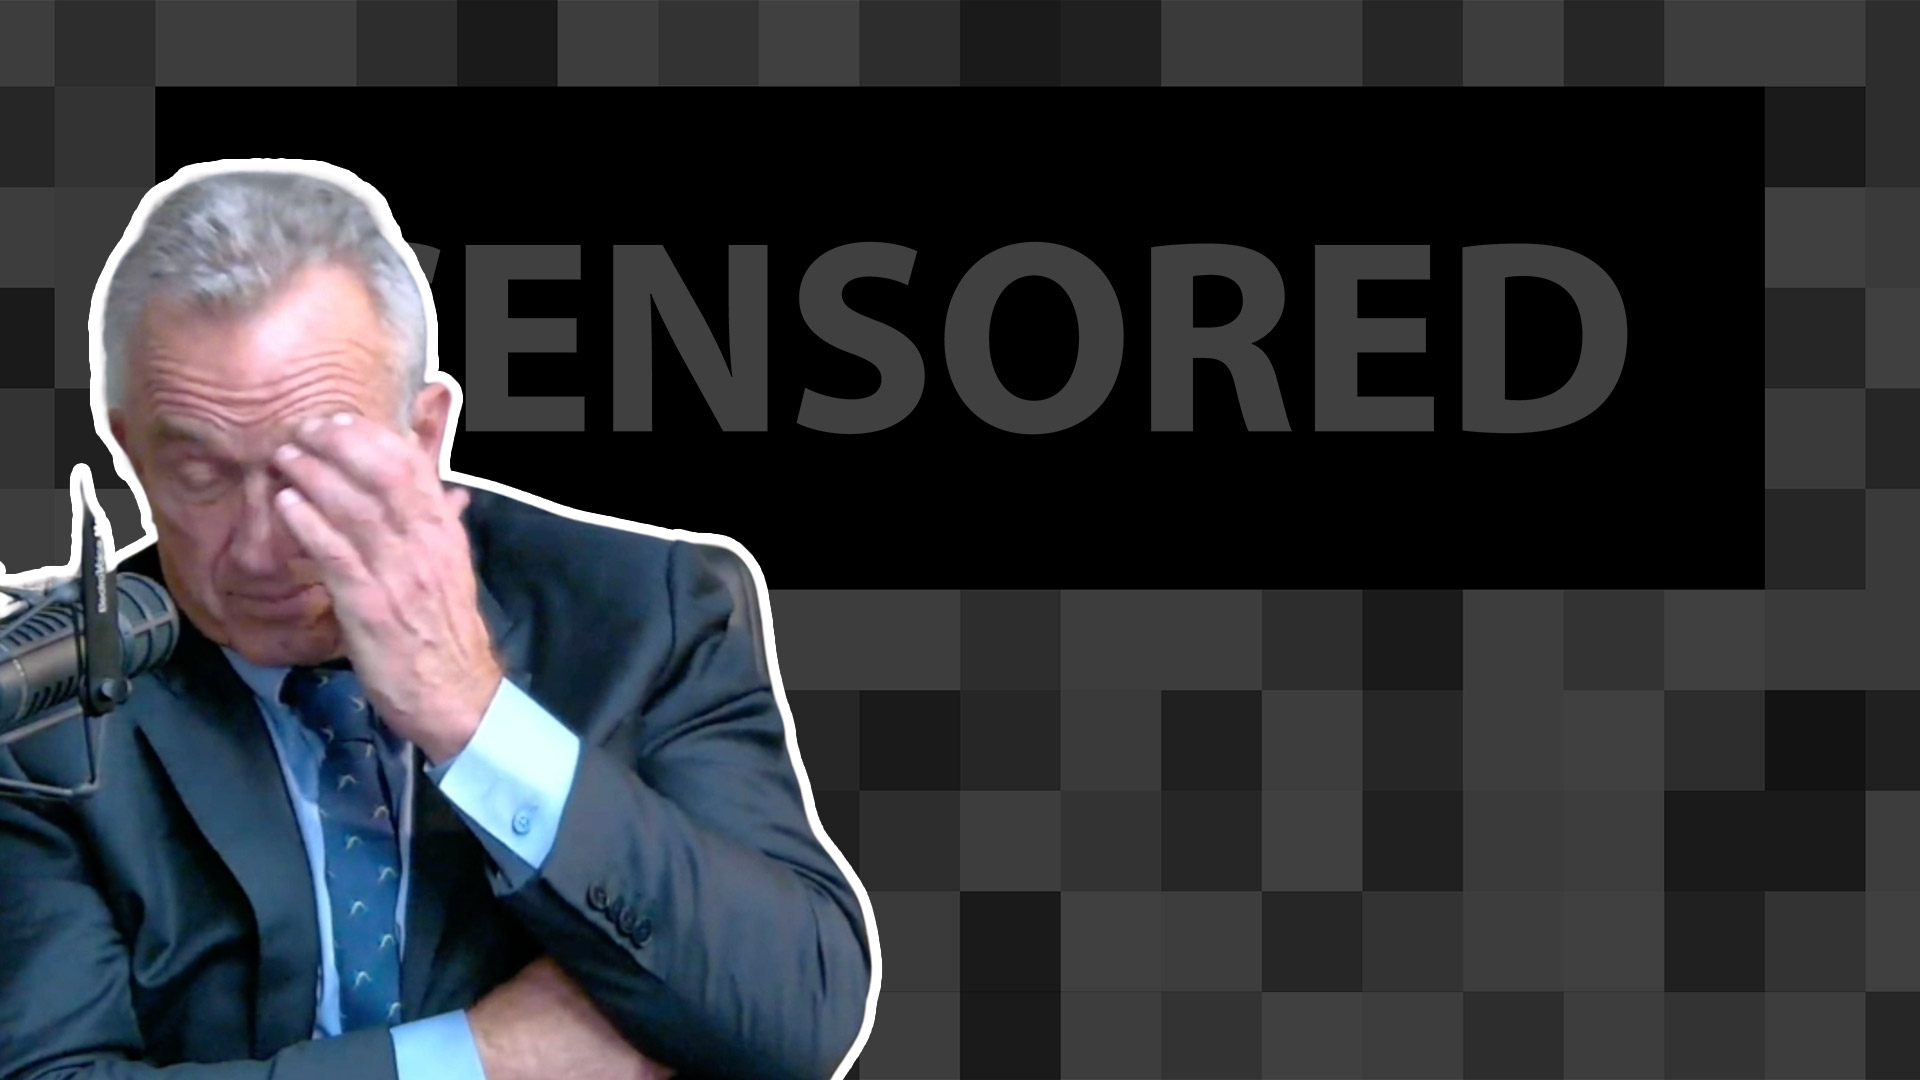 Why is this Presidential Candidate the Most Censored Man in America?